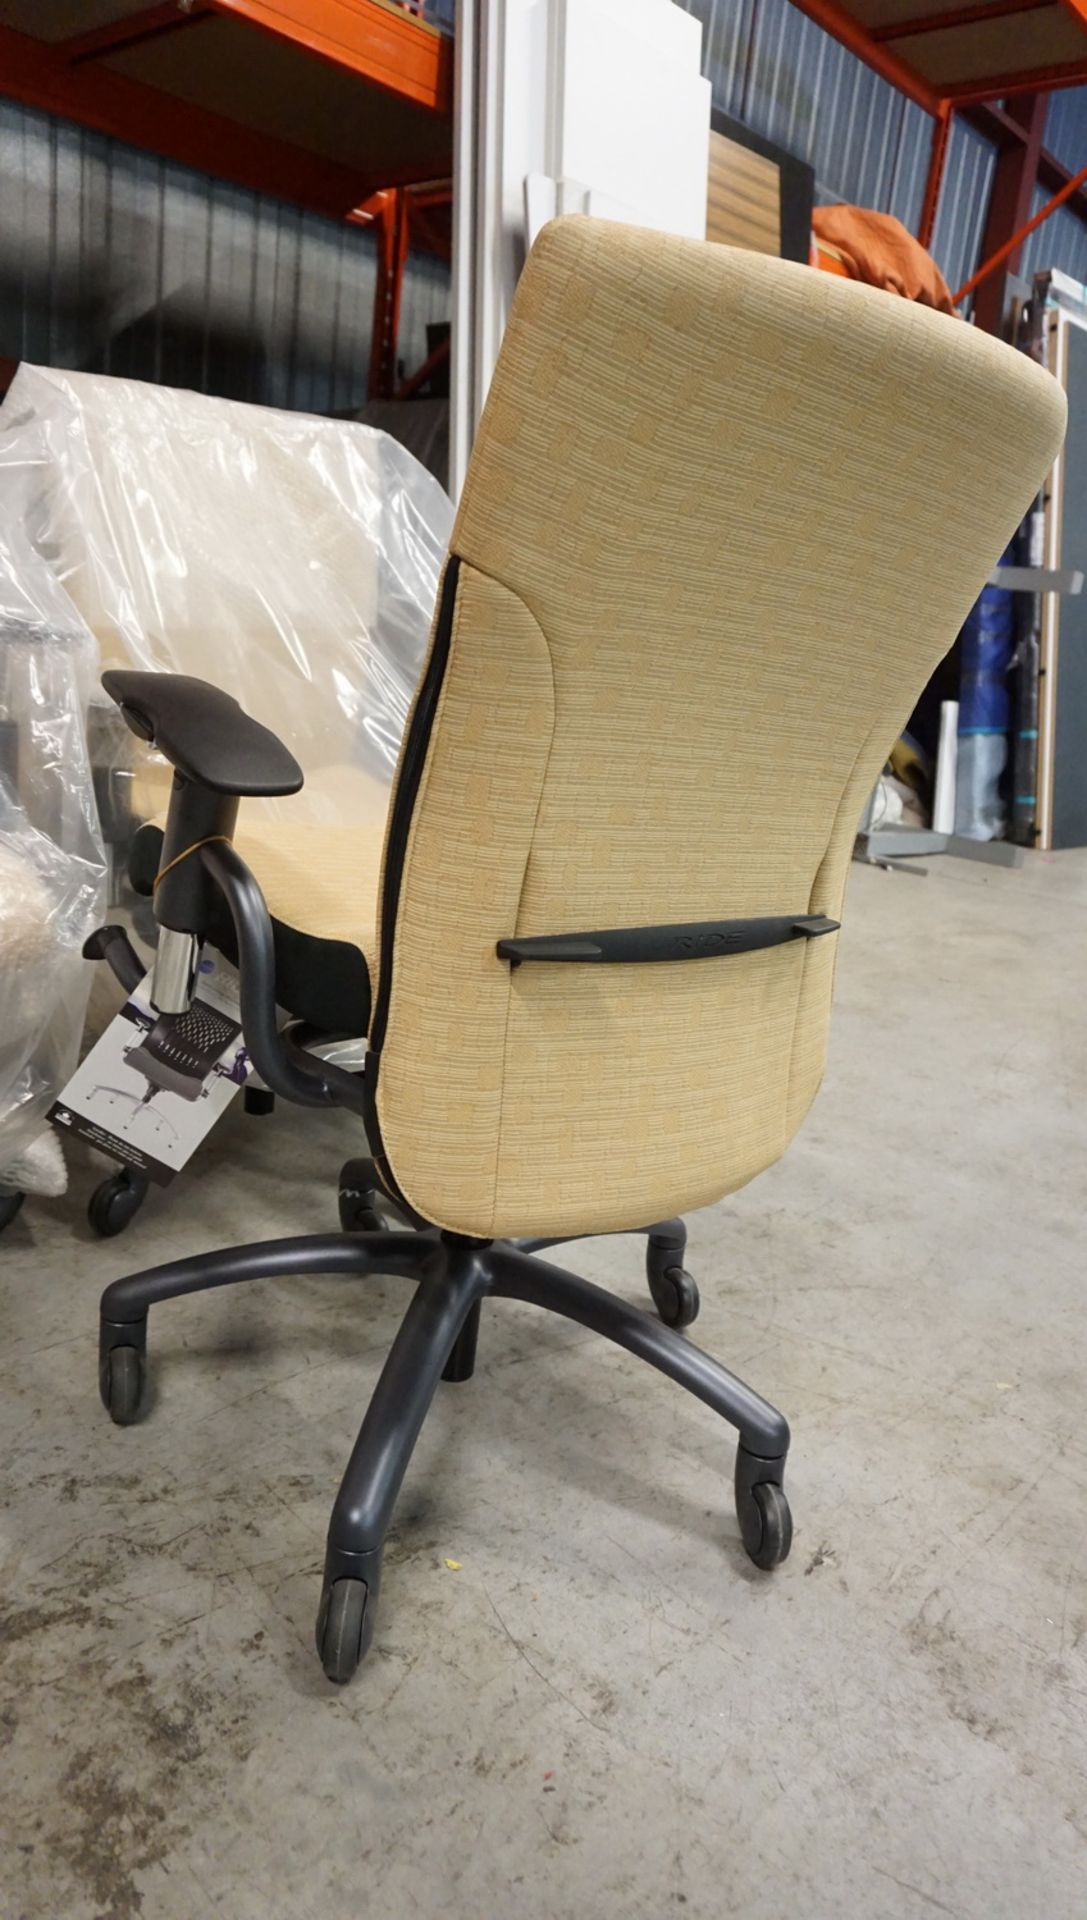 UNITS - GLOBAL RIDE BROWN FABRIC PNEU ADJ OFFICE CHAIRS - Image 2 of 2